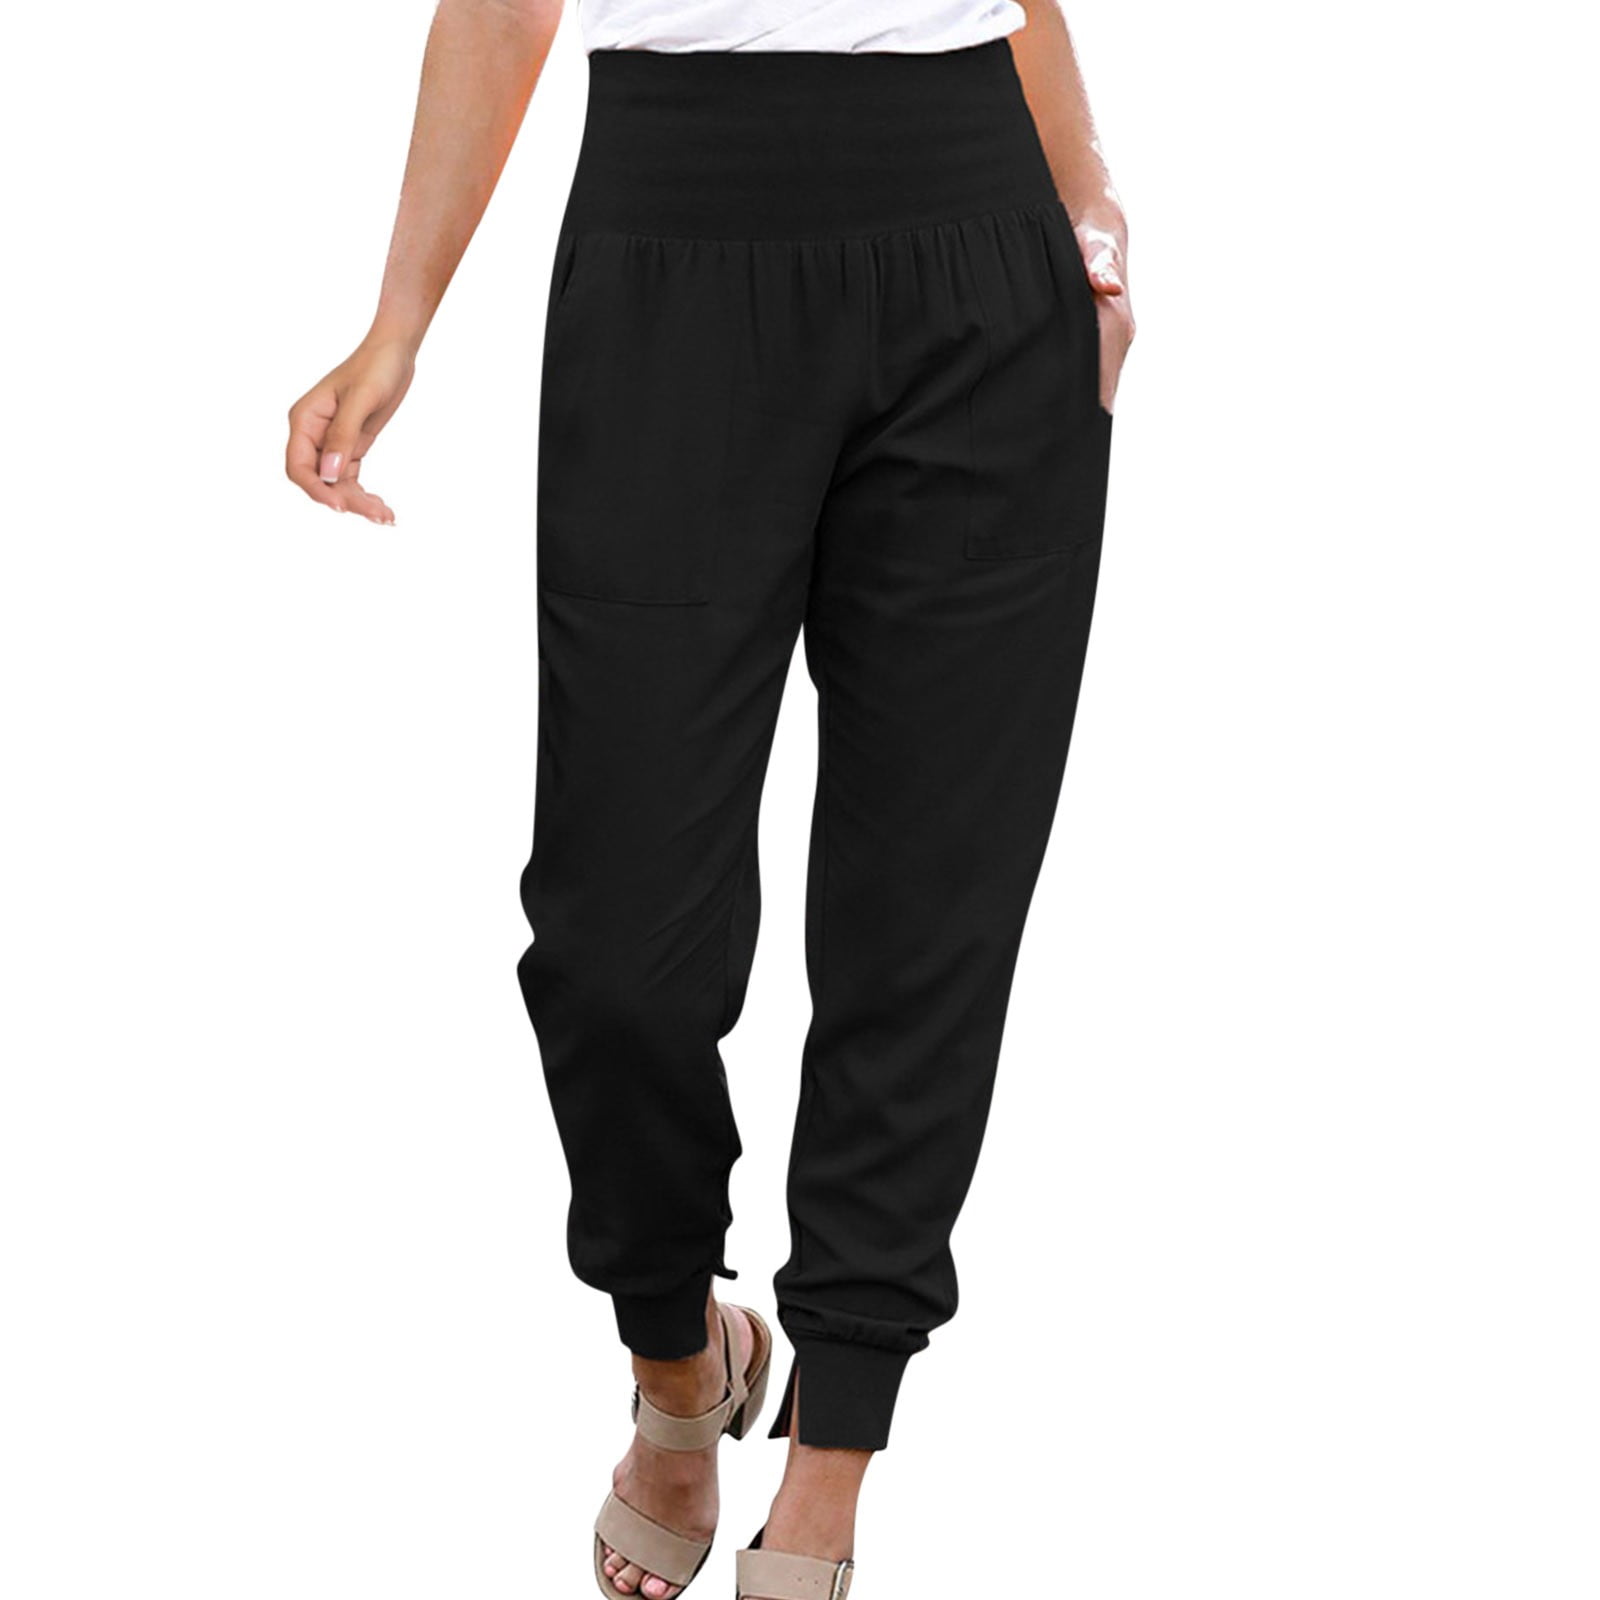 Women's Joggers and Dressy Jogger Pants (3)